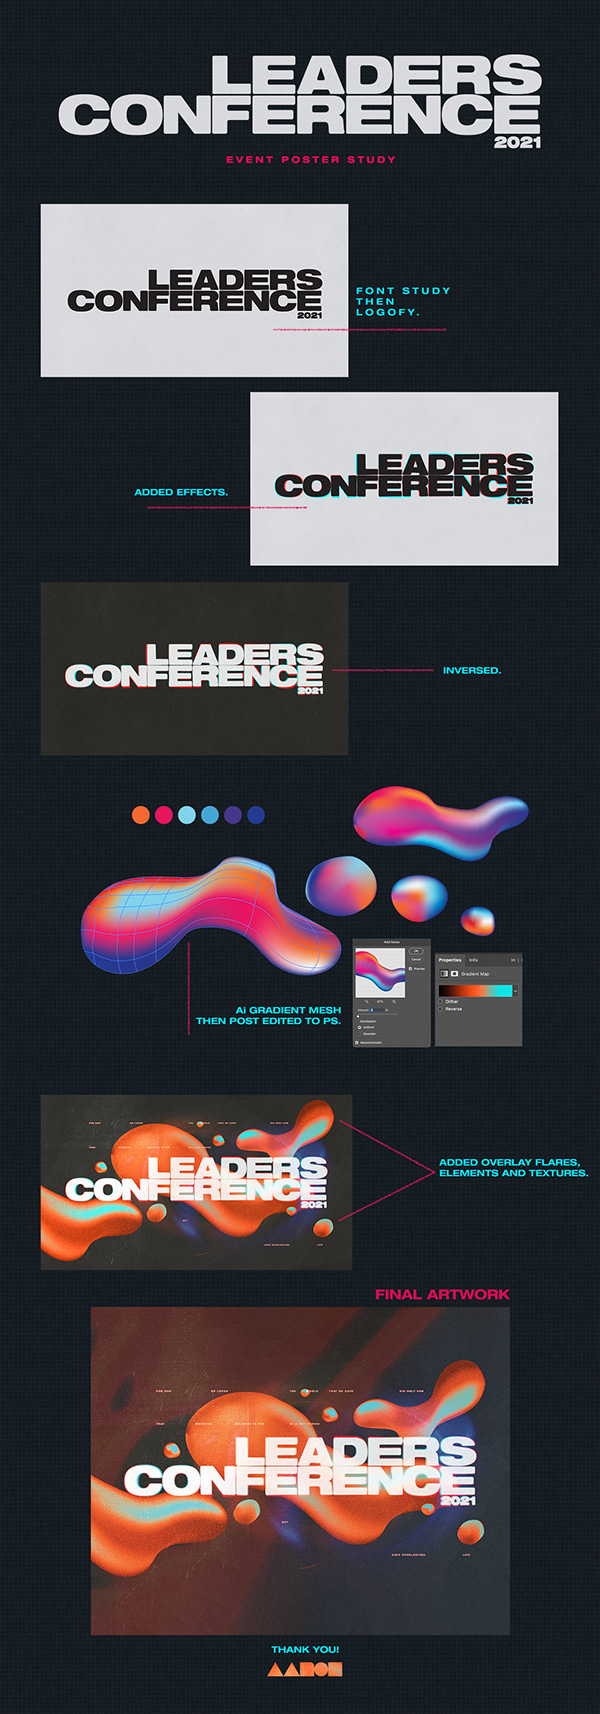 LEADERS CONFERENCE 2021 - ART DIRECTION STUDY